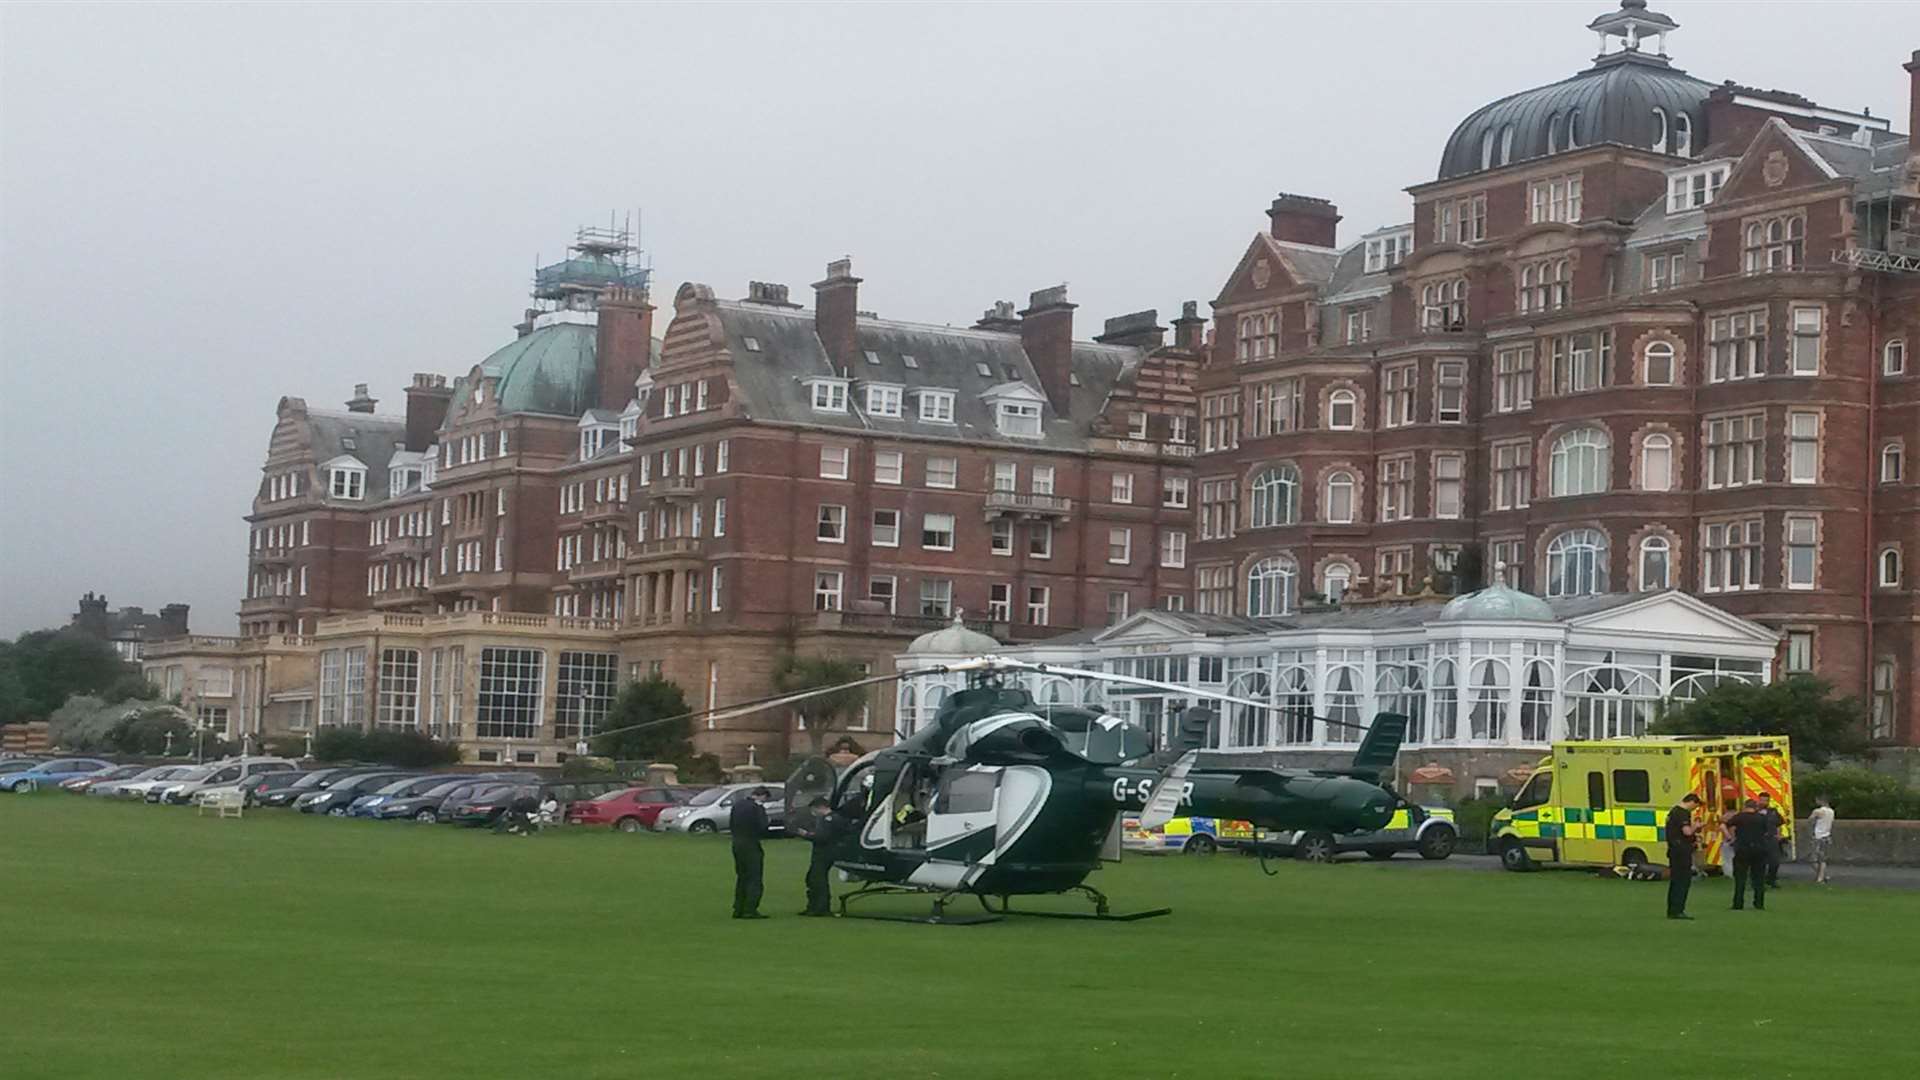 The air ambulance landed at the Leas, Folkestone